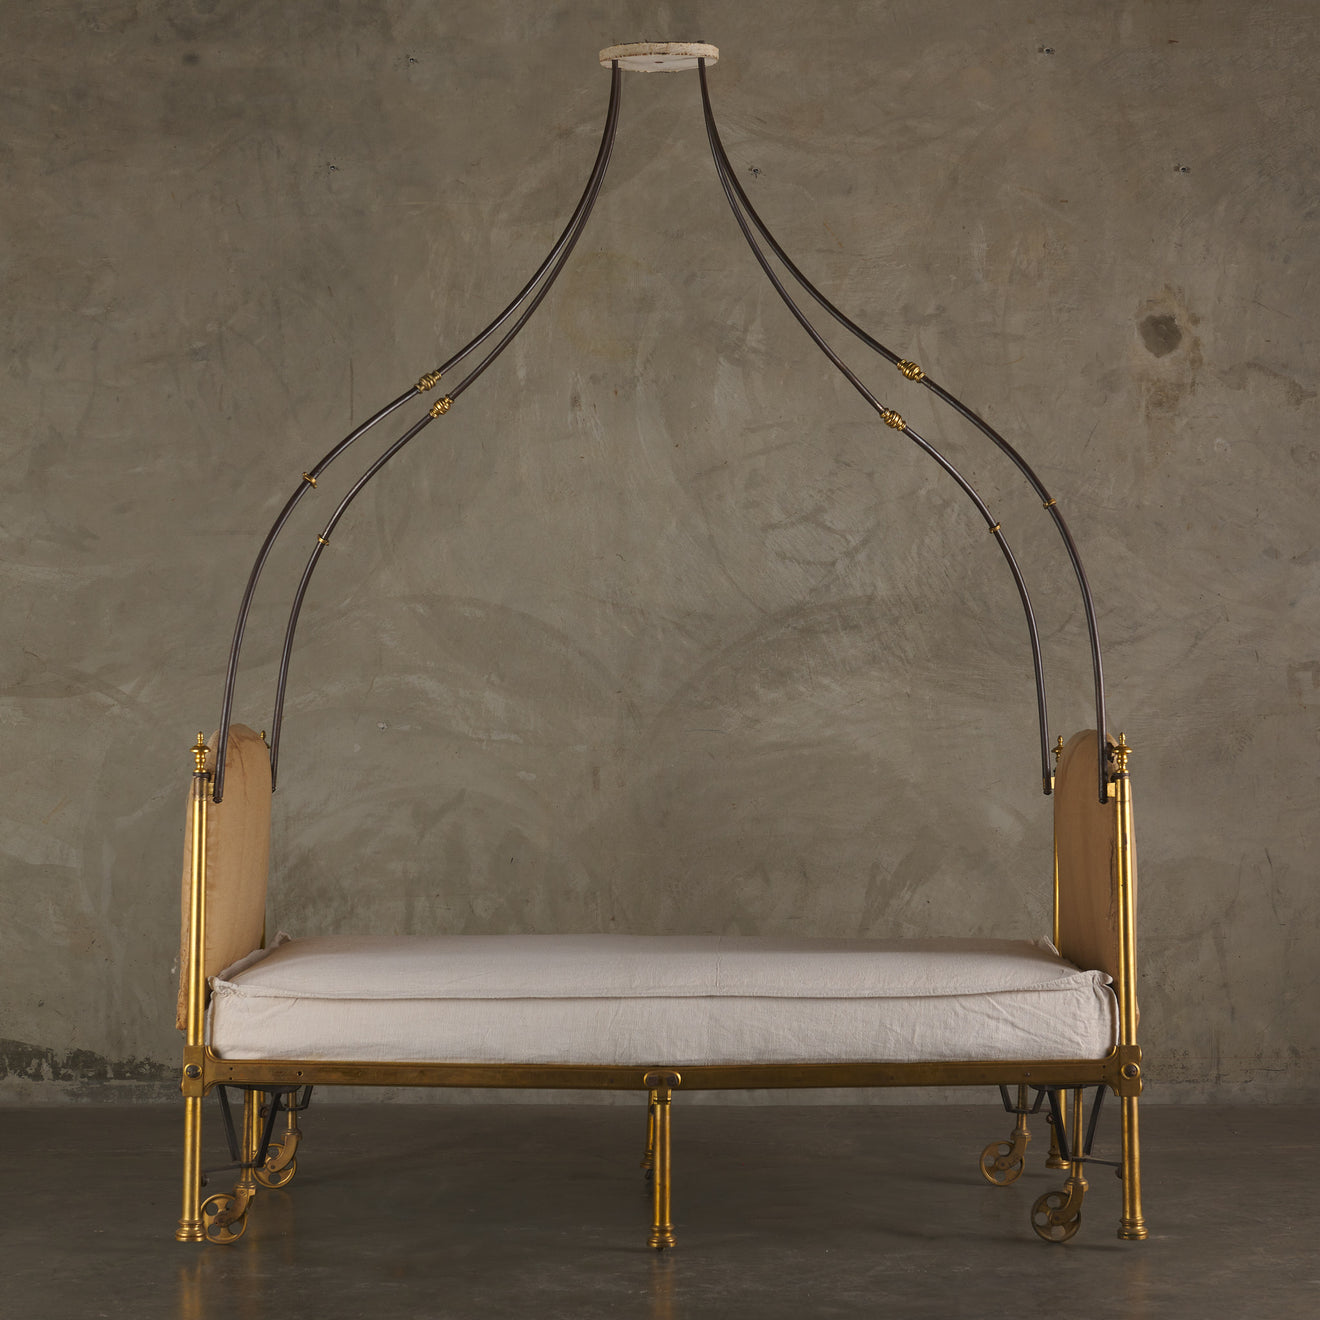 EMPIRE FOLDING LIT DE CAMP BED WITH CANOPY, POSSIBLY BY MARIE-JEAN DESOUCHES (1764-1828)